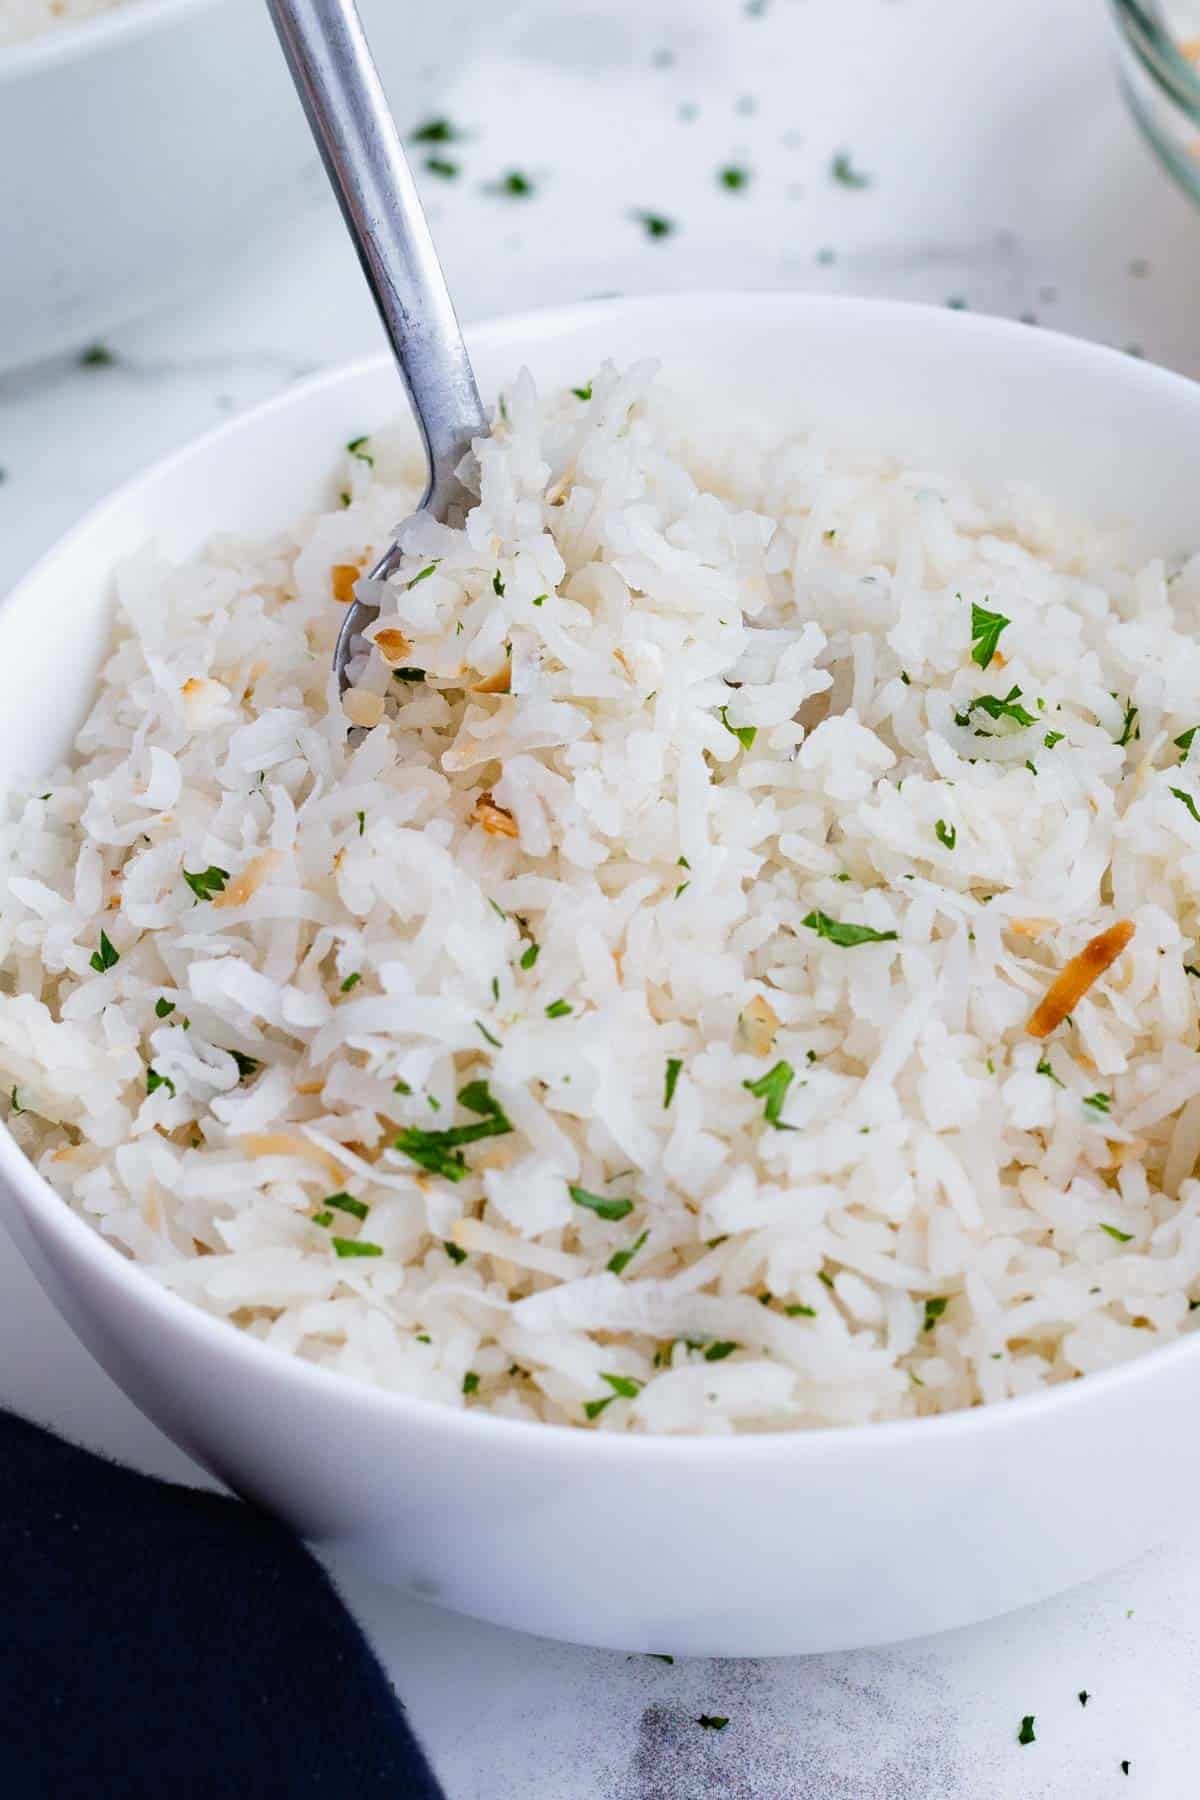 Coconut rice is easy to make on the stovetop with a few basic ingredients.